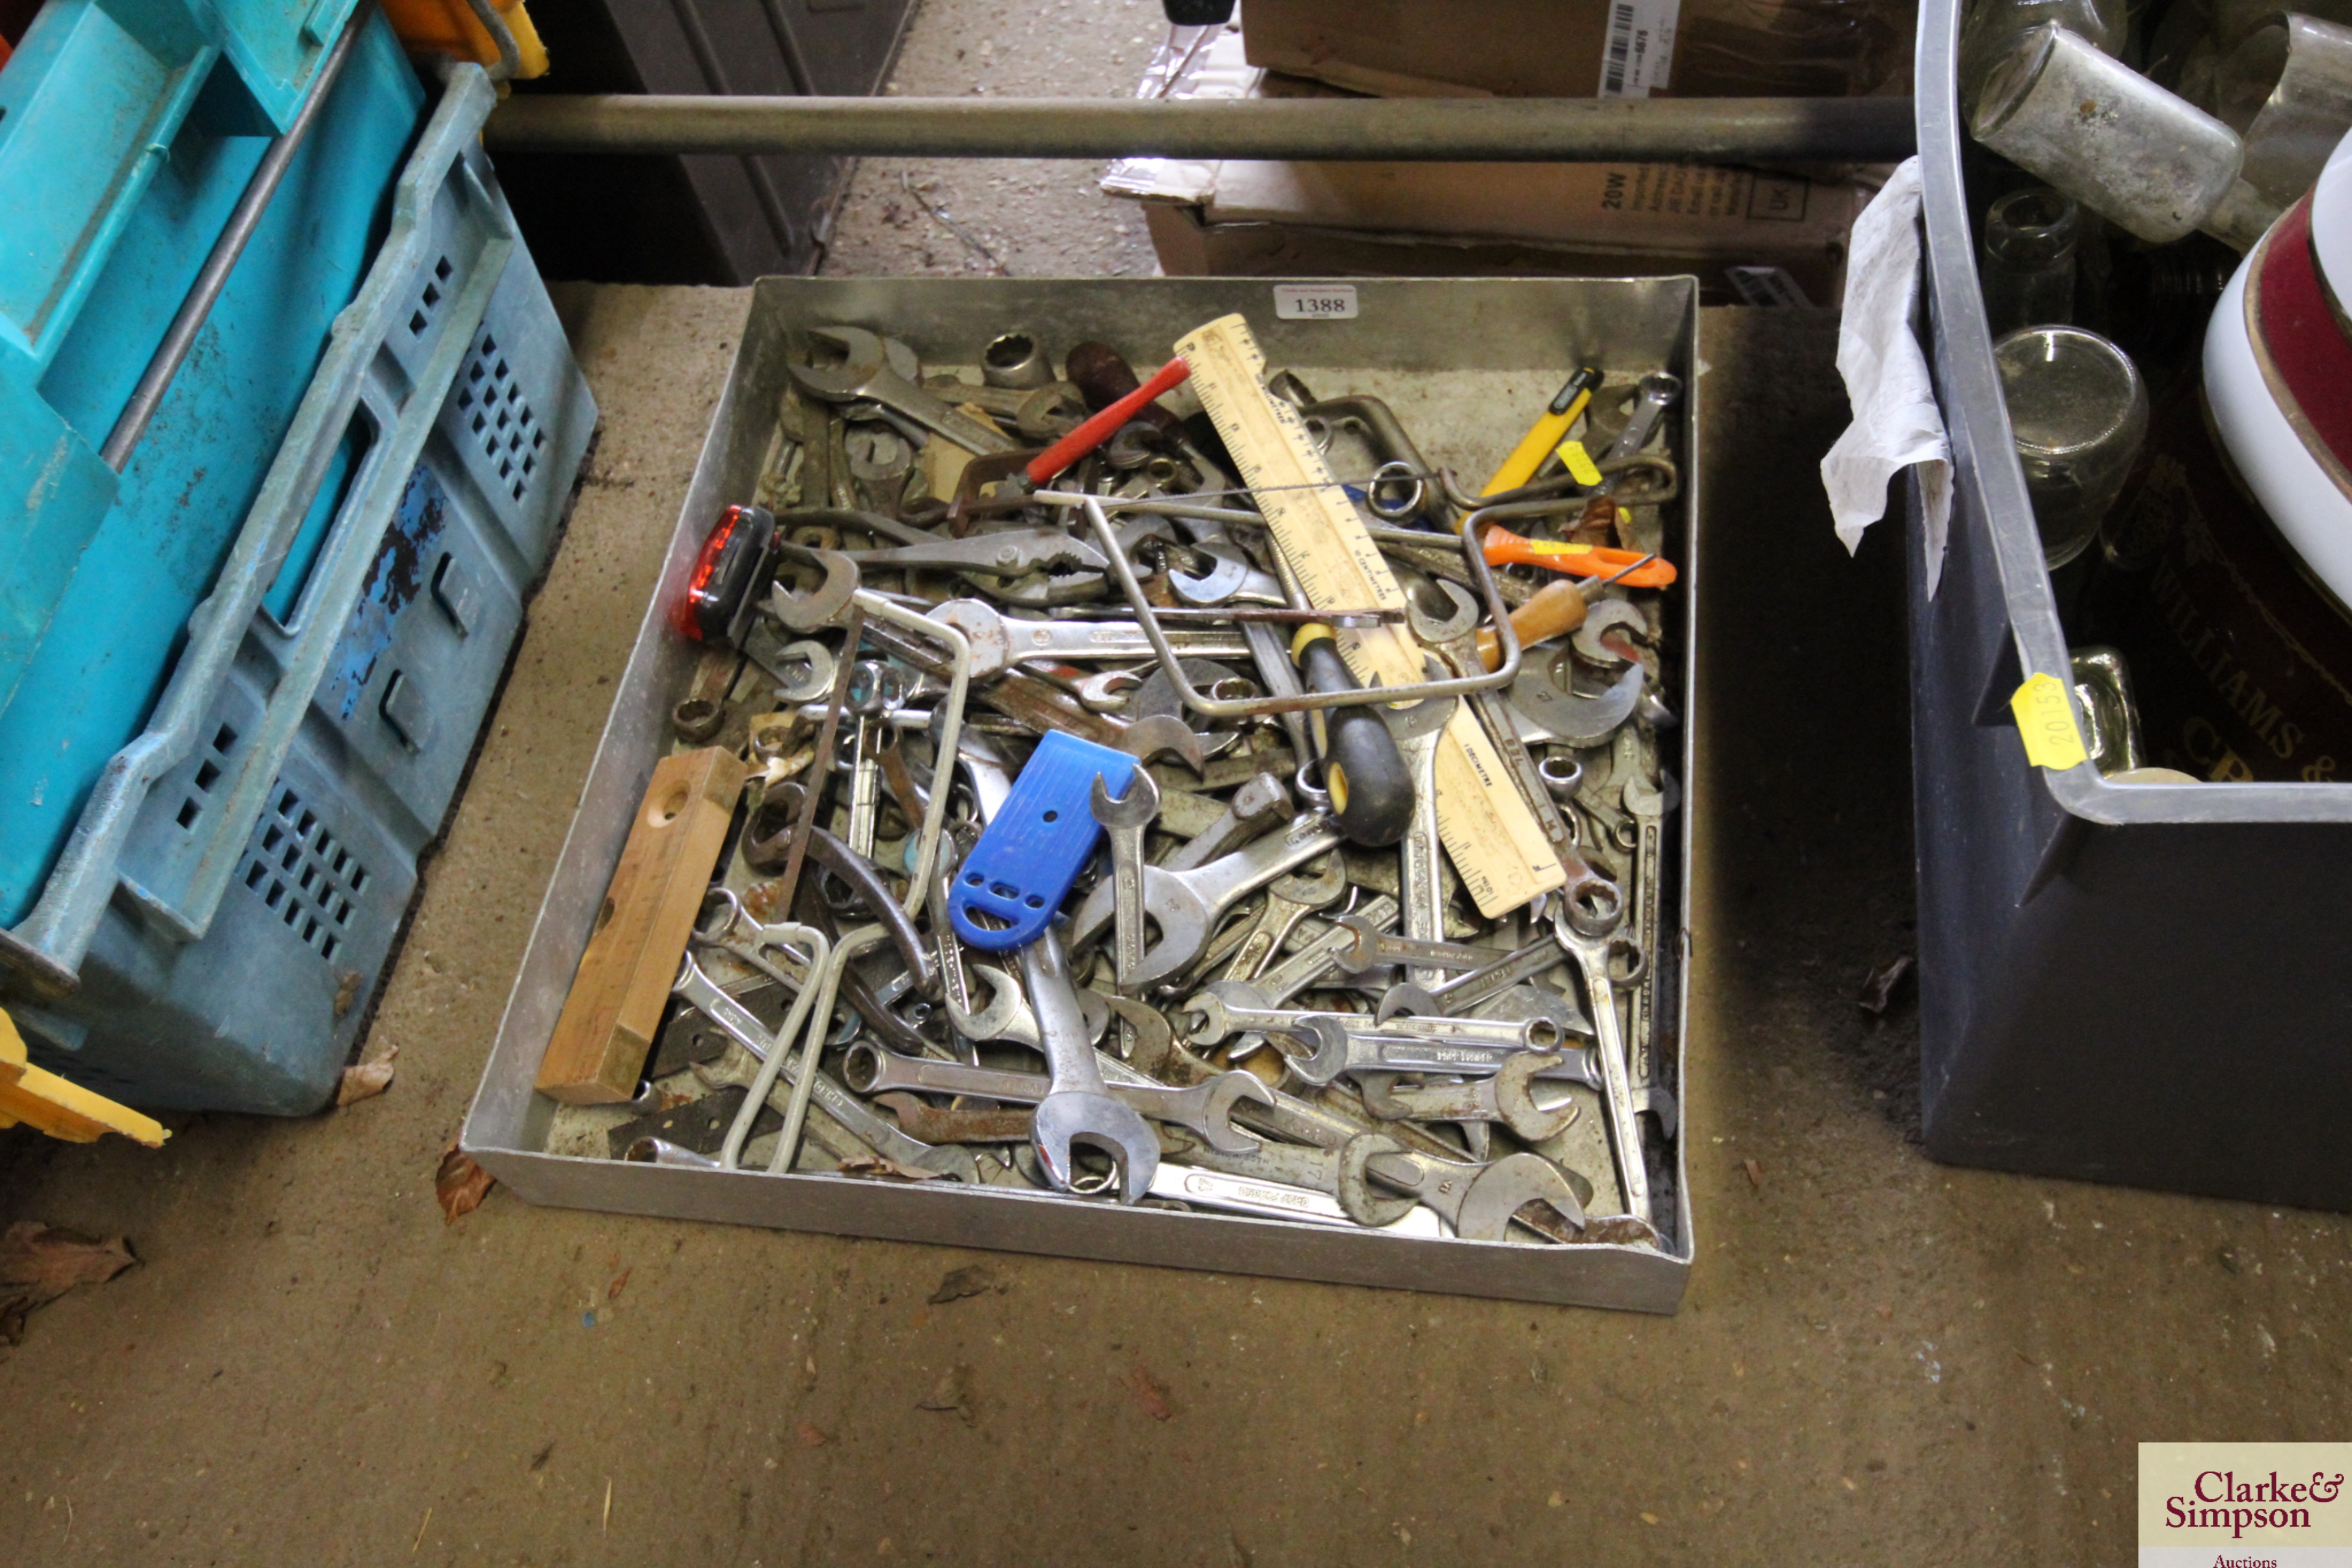 A metal tray and contents of various sized spanner